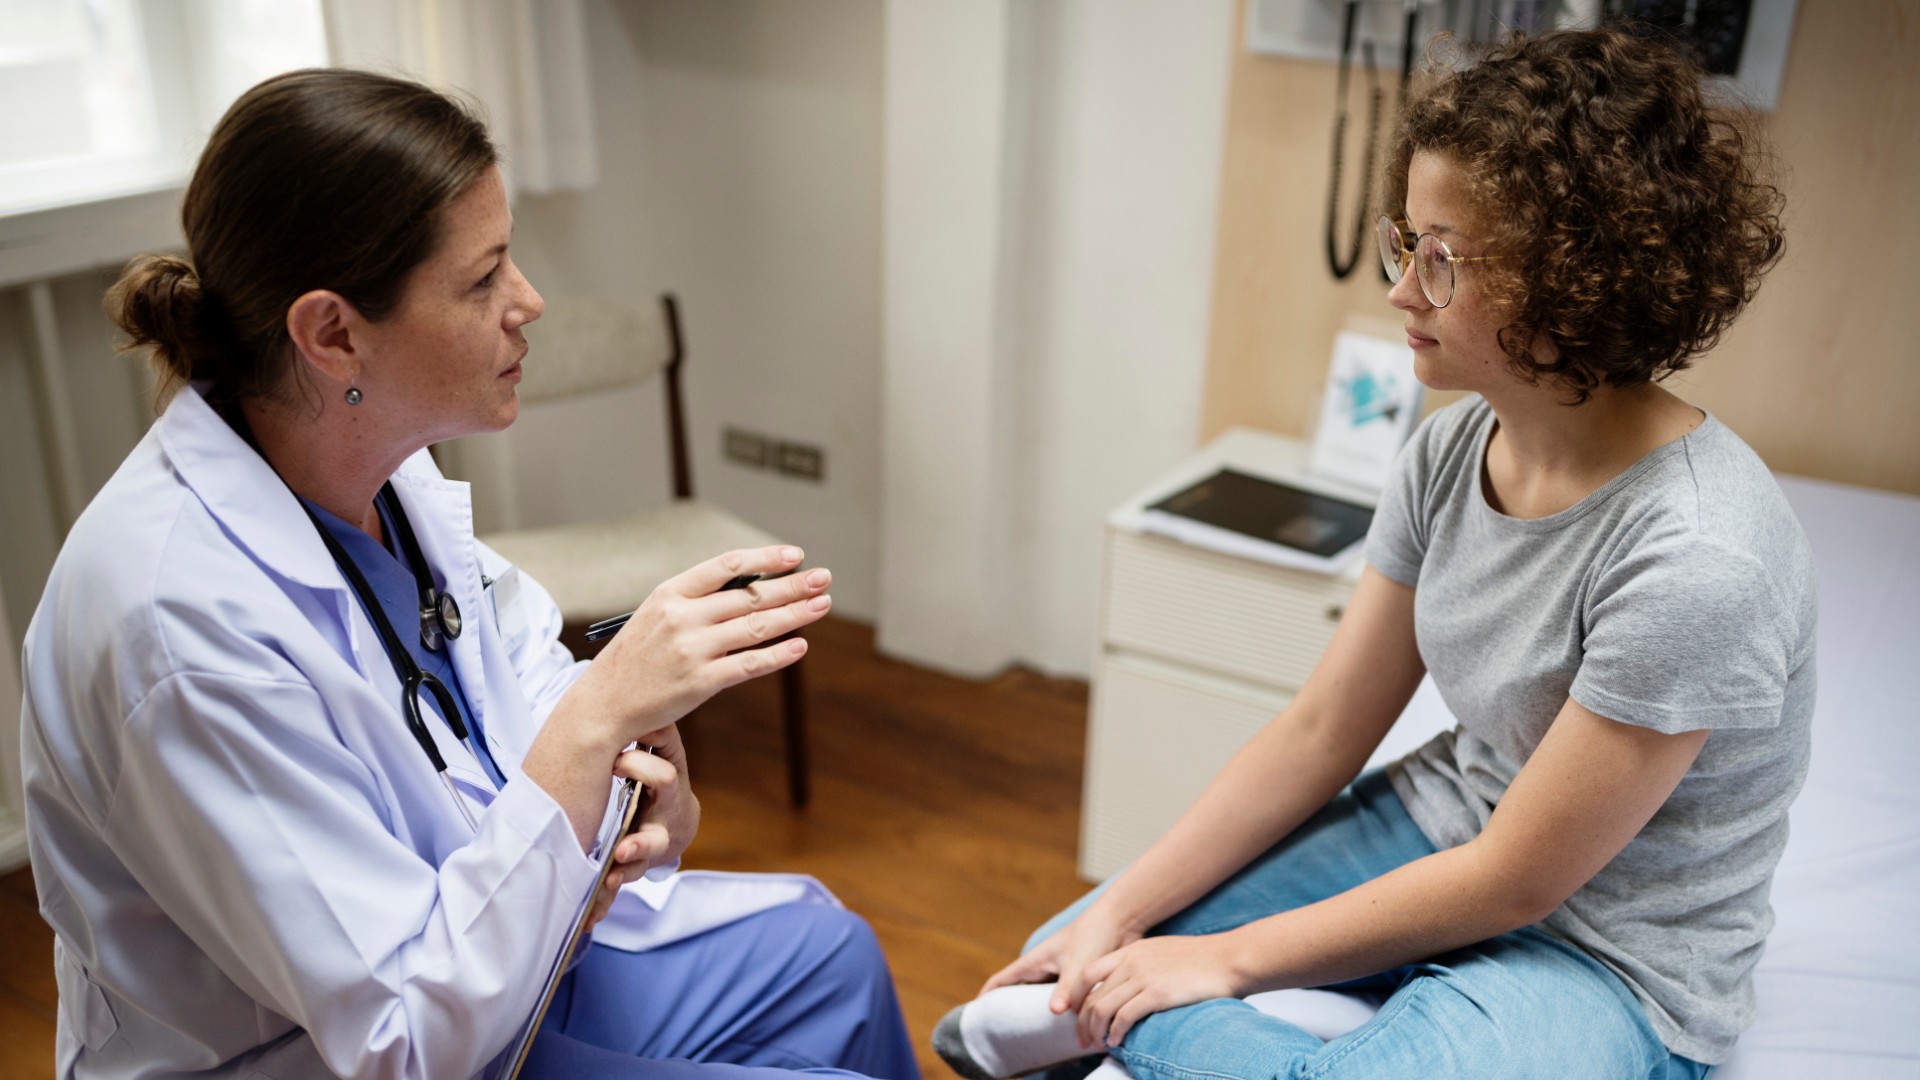 It can be a difficult conversation to have – when should a young woman begin seeing an OB/GYN? Sarah Pollock, MD, with Eastover OB/GYN, helps answer parents’ questions about the appropriate age, exam expectations and what can and should be discussed at these important early visits. 